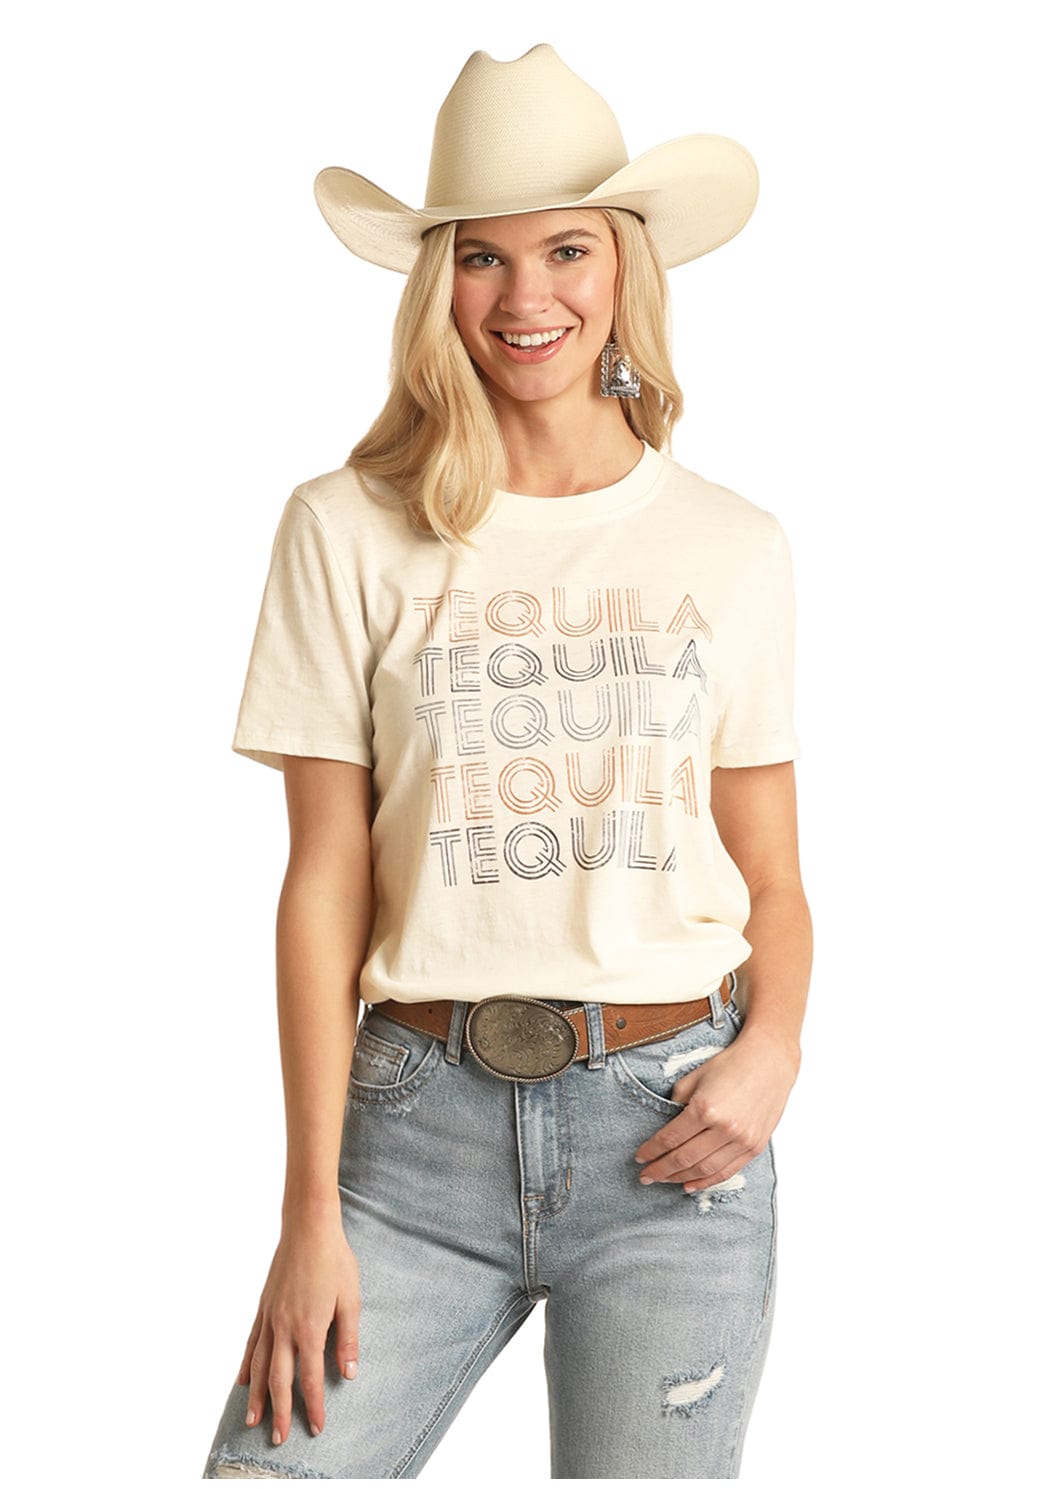 PANHANDLE SLIM Shirts Rock & Roll Cowgirl Women's Tequila Graphic Tee 49T3242